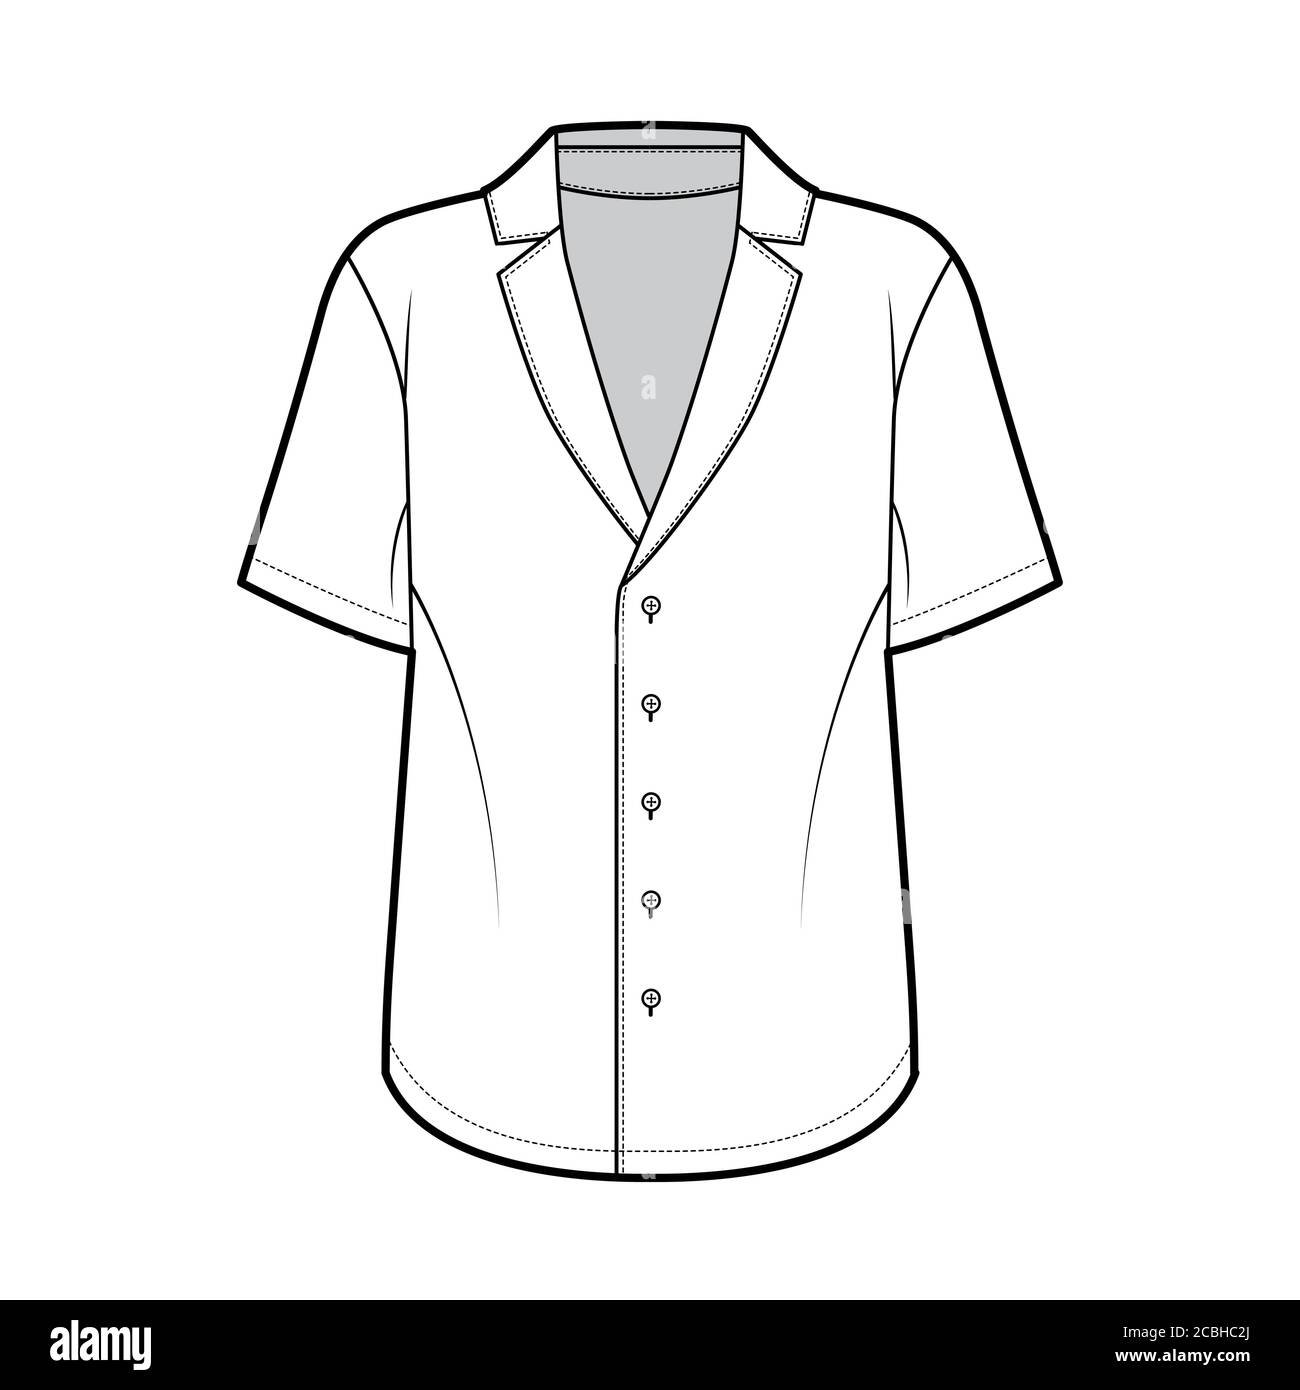 Pajama-style shirt technical fashion illustration with loose silhouette, pointed notch collar, front button fastenings, short sleeves. Flat apparel template front white color. Women men unisex top Stock Vector